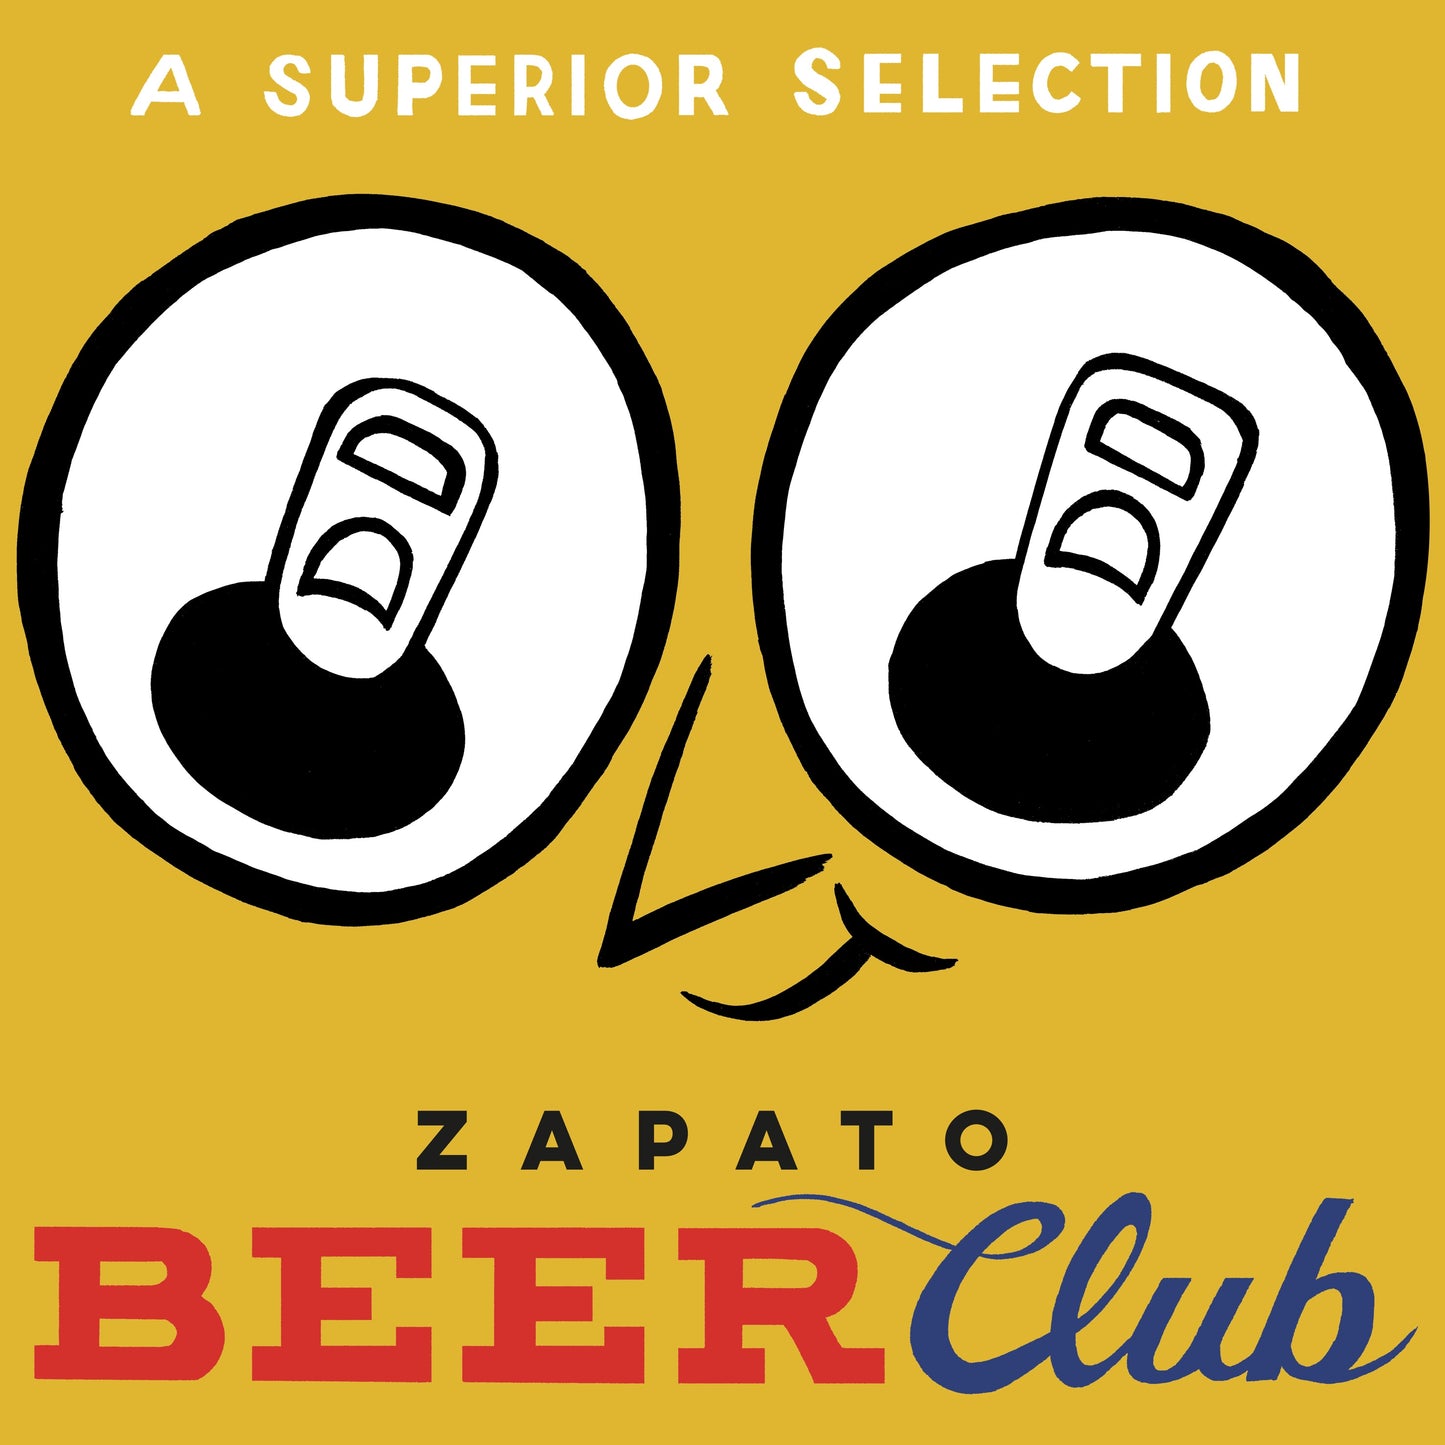 The Gift Of Beer Club